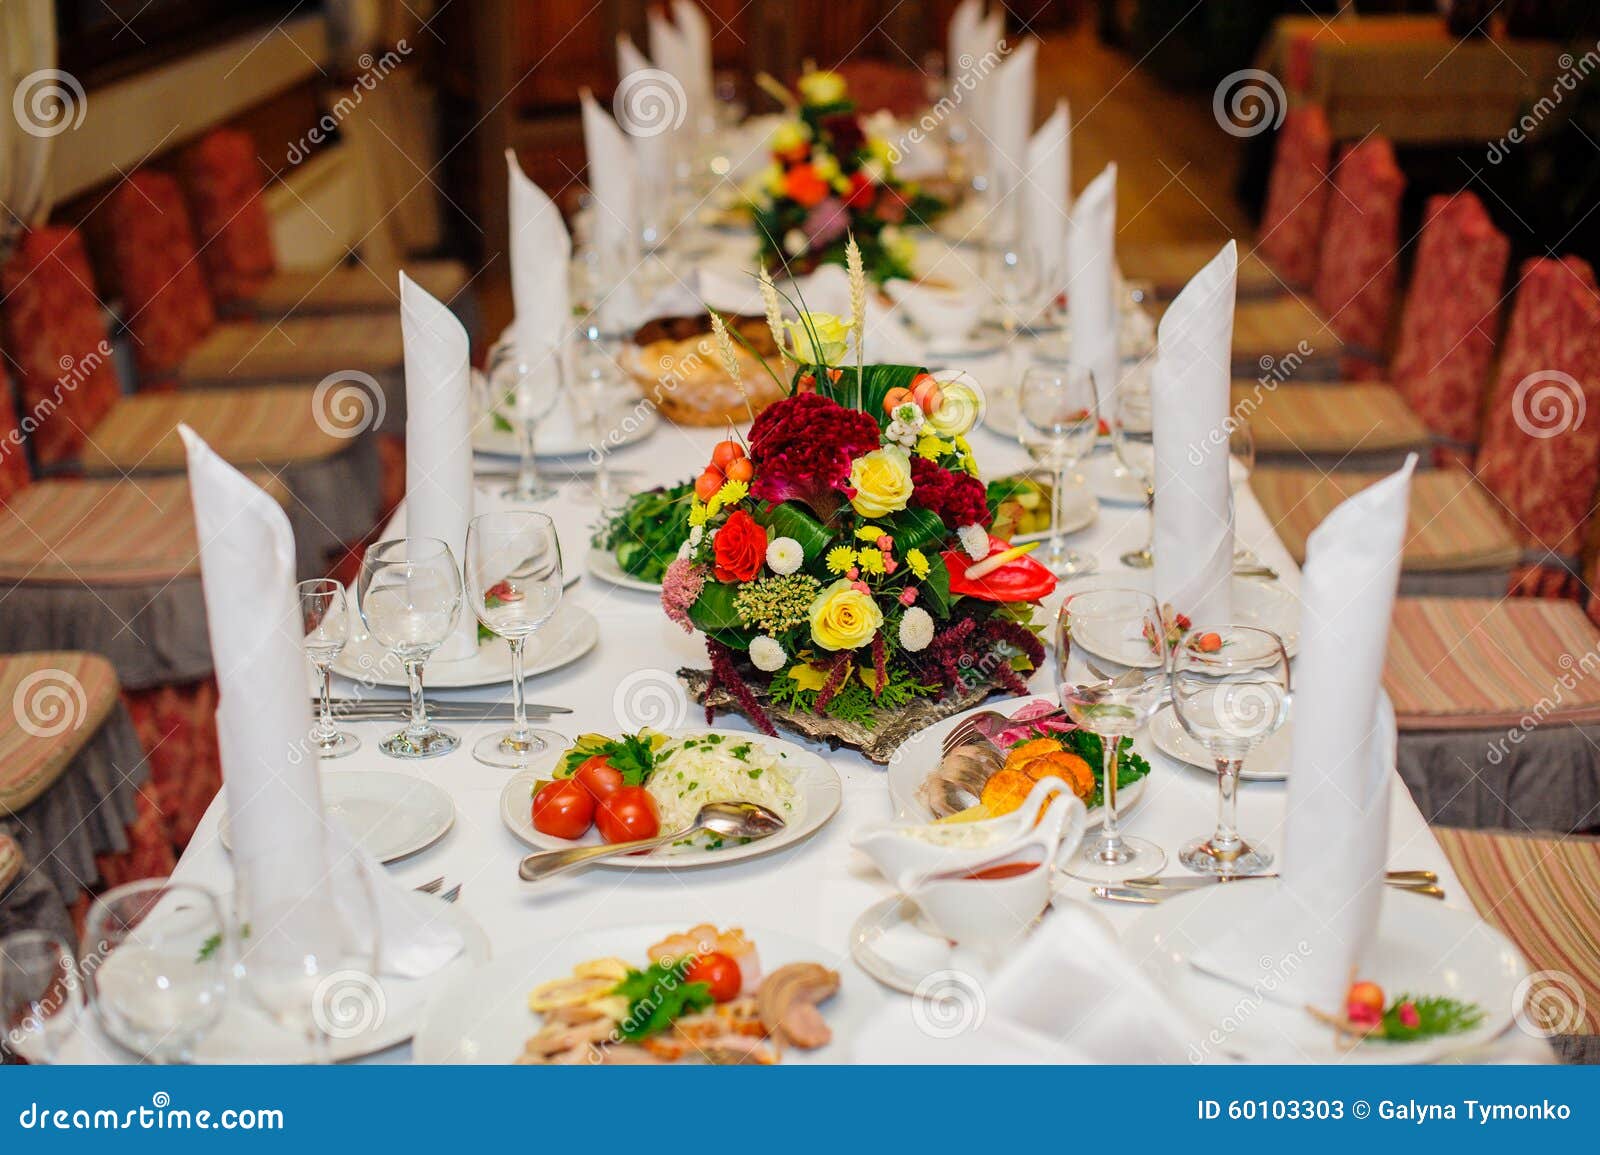 beautifully decorated dining room tables